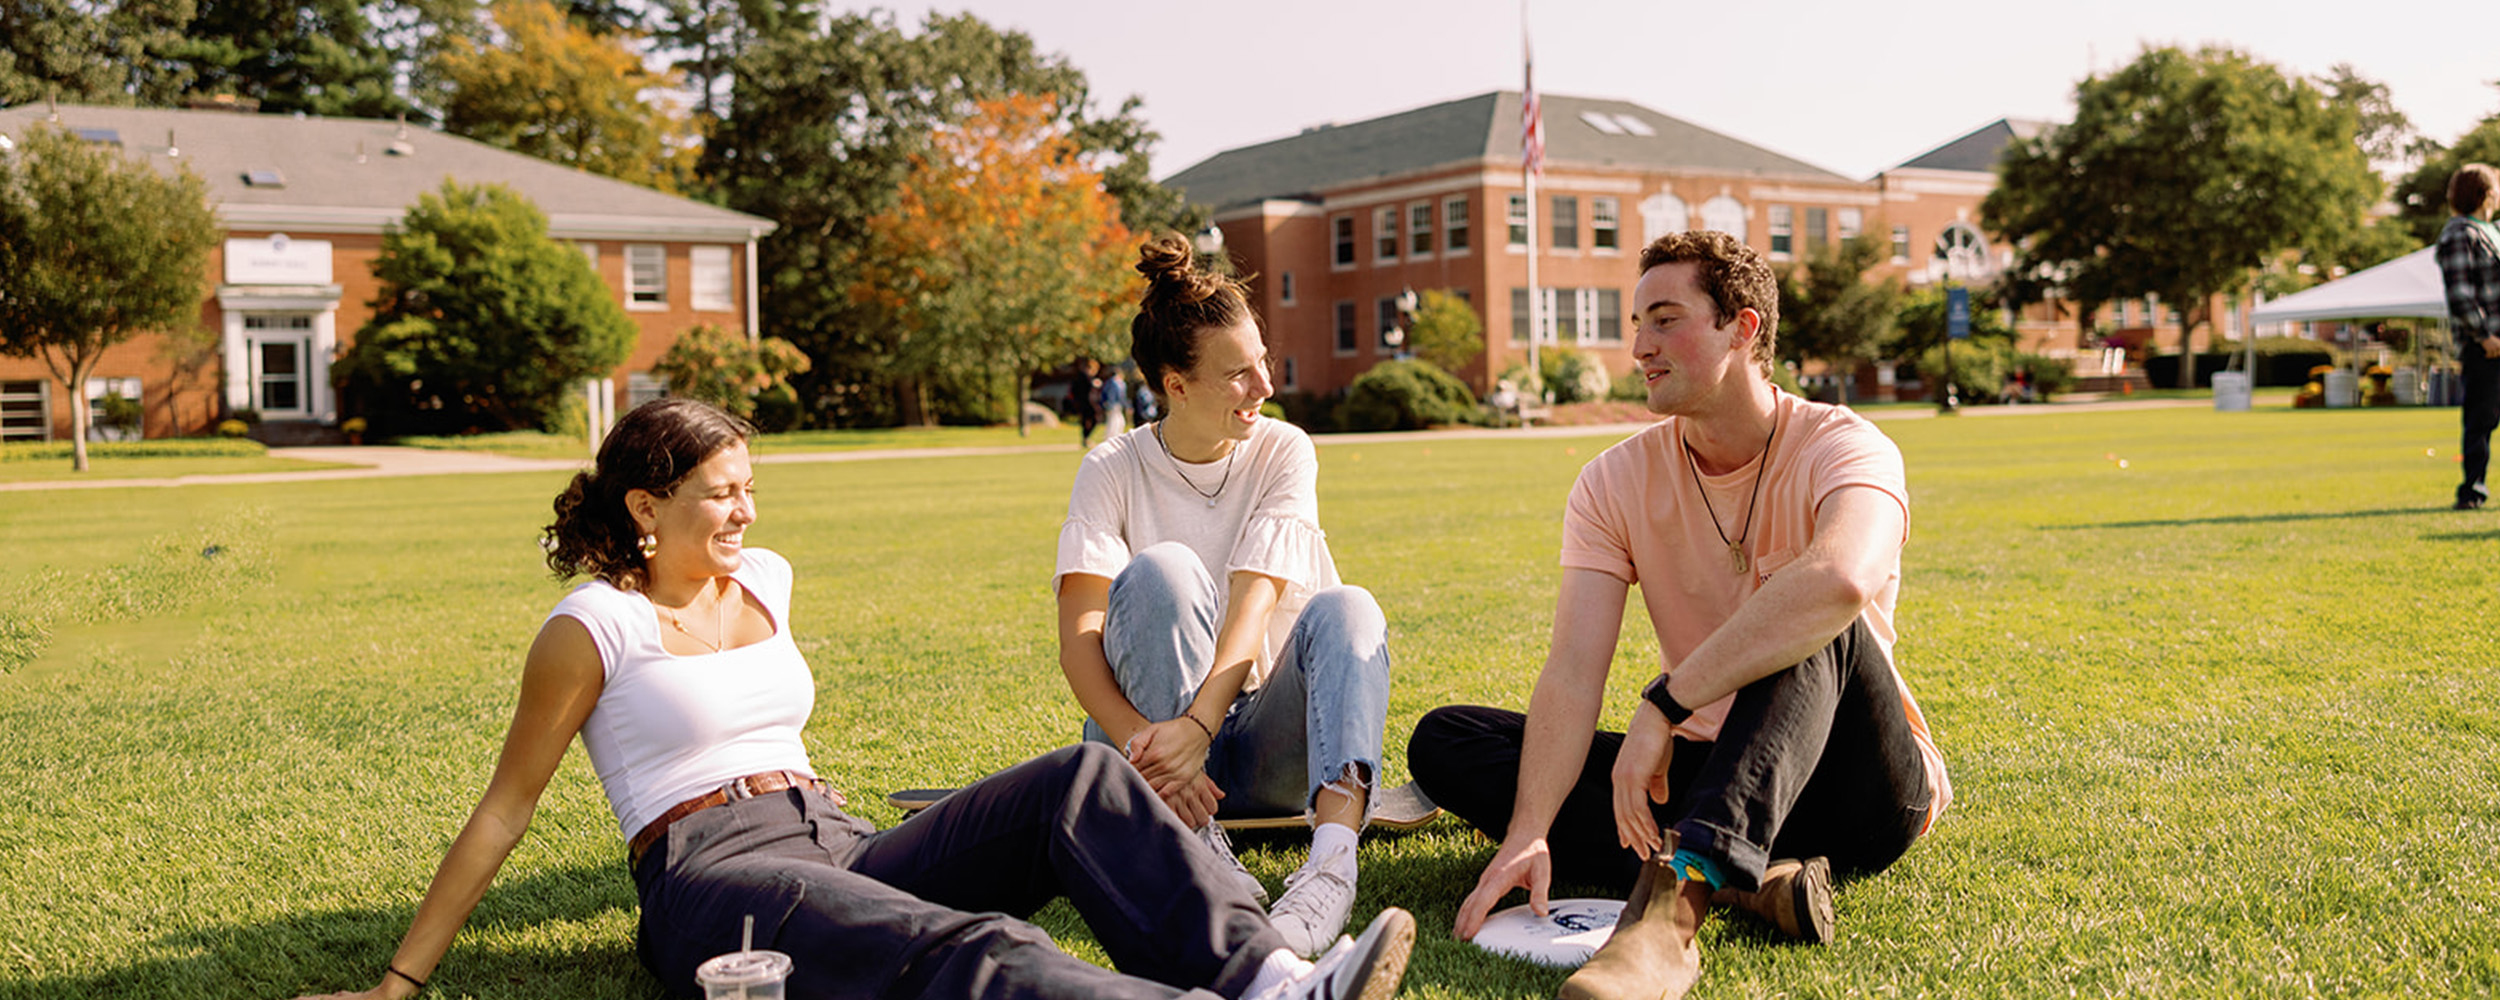 students hanging out on the quad